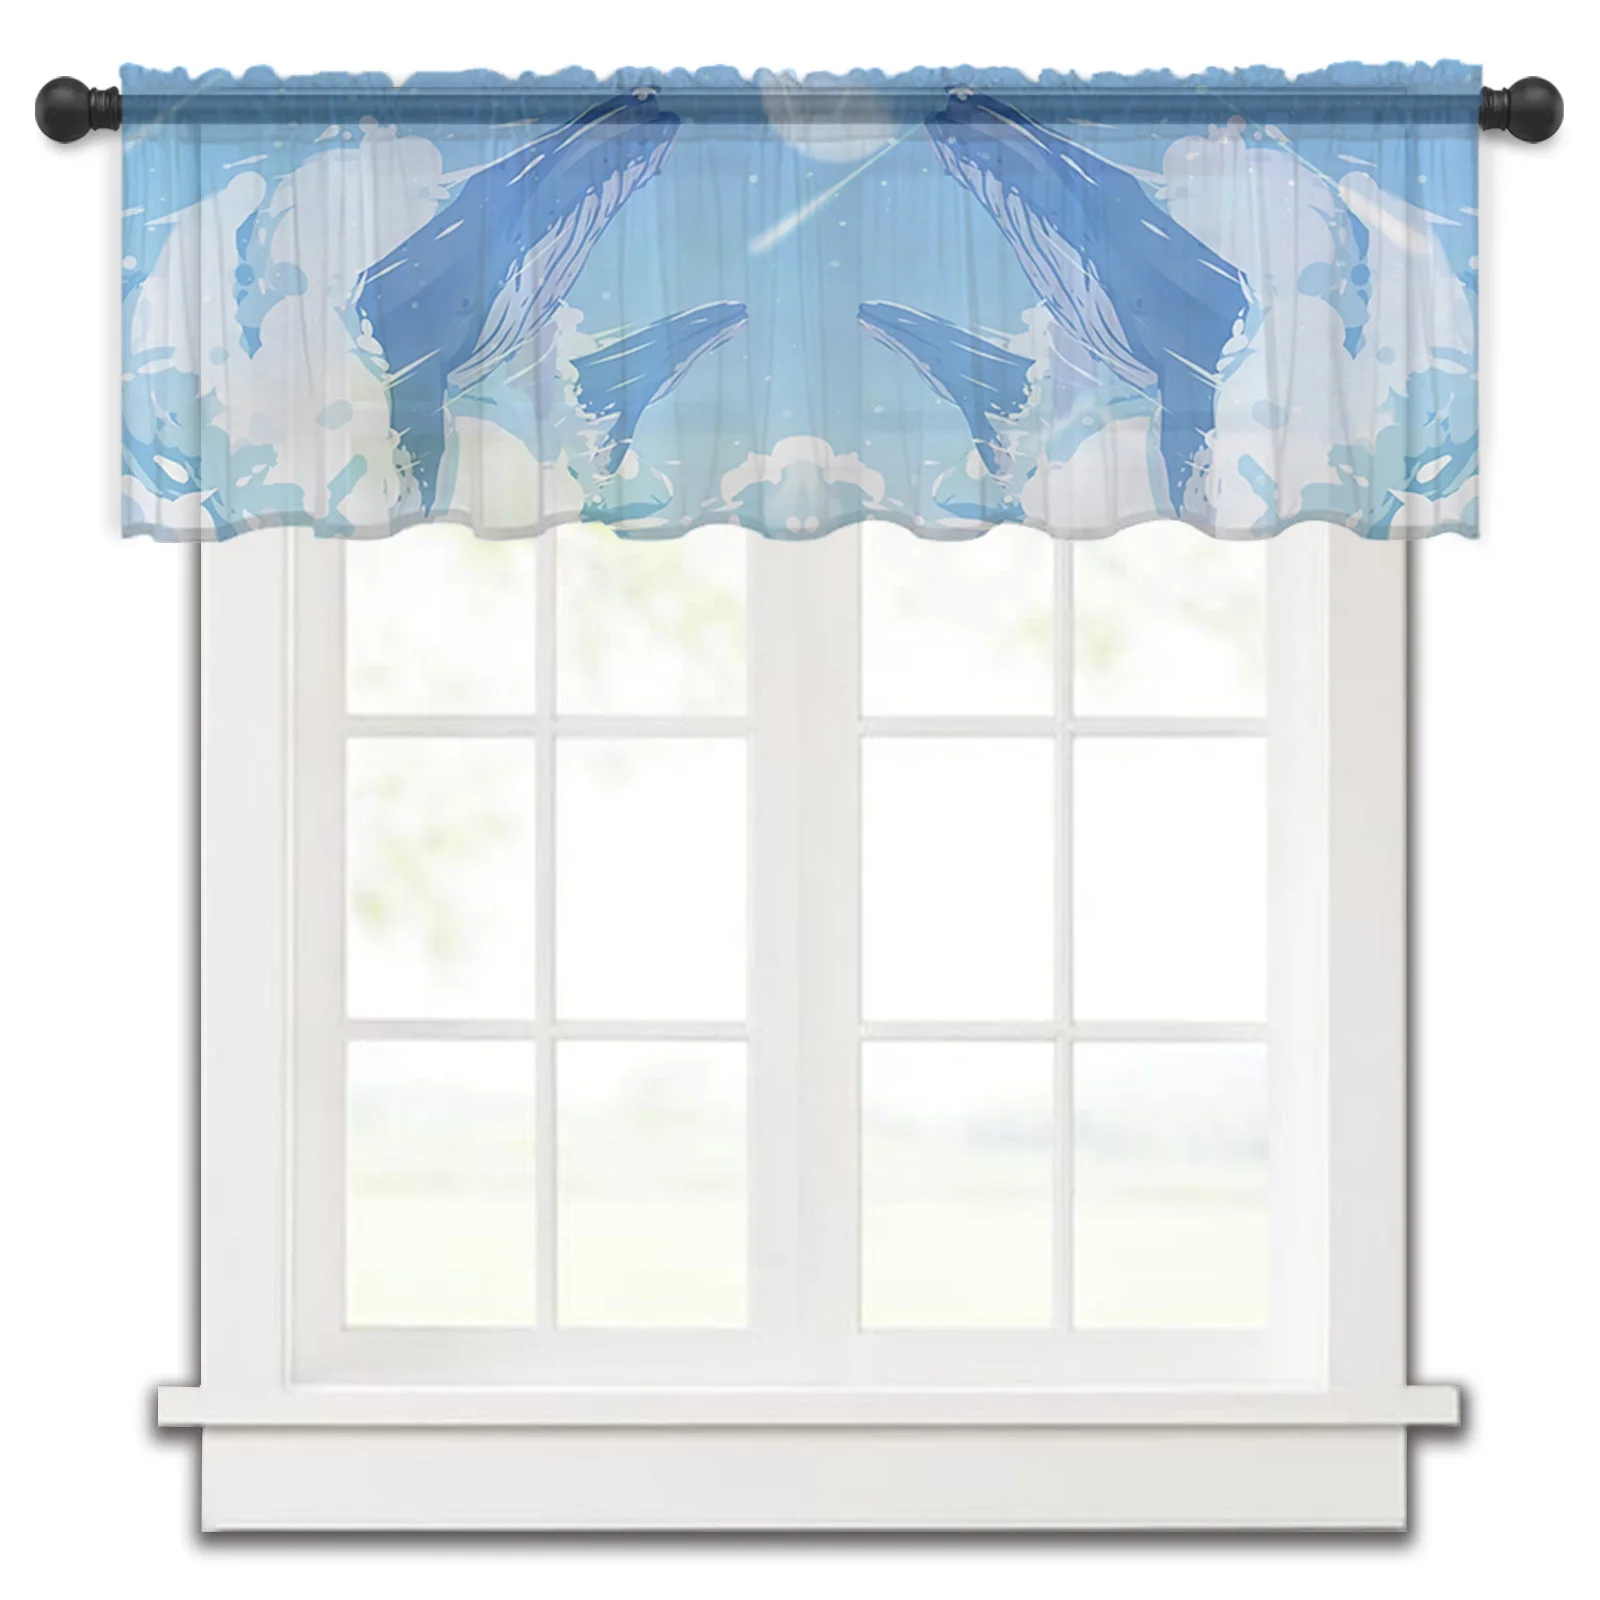 

Blue Sky Shooting Stars Clouds Whales Clouds Kitchen Curtains Tulle Sheer Short Curtain Bedroom Living Room Decor Voile Drapes